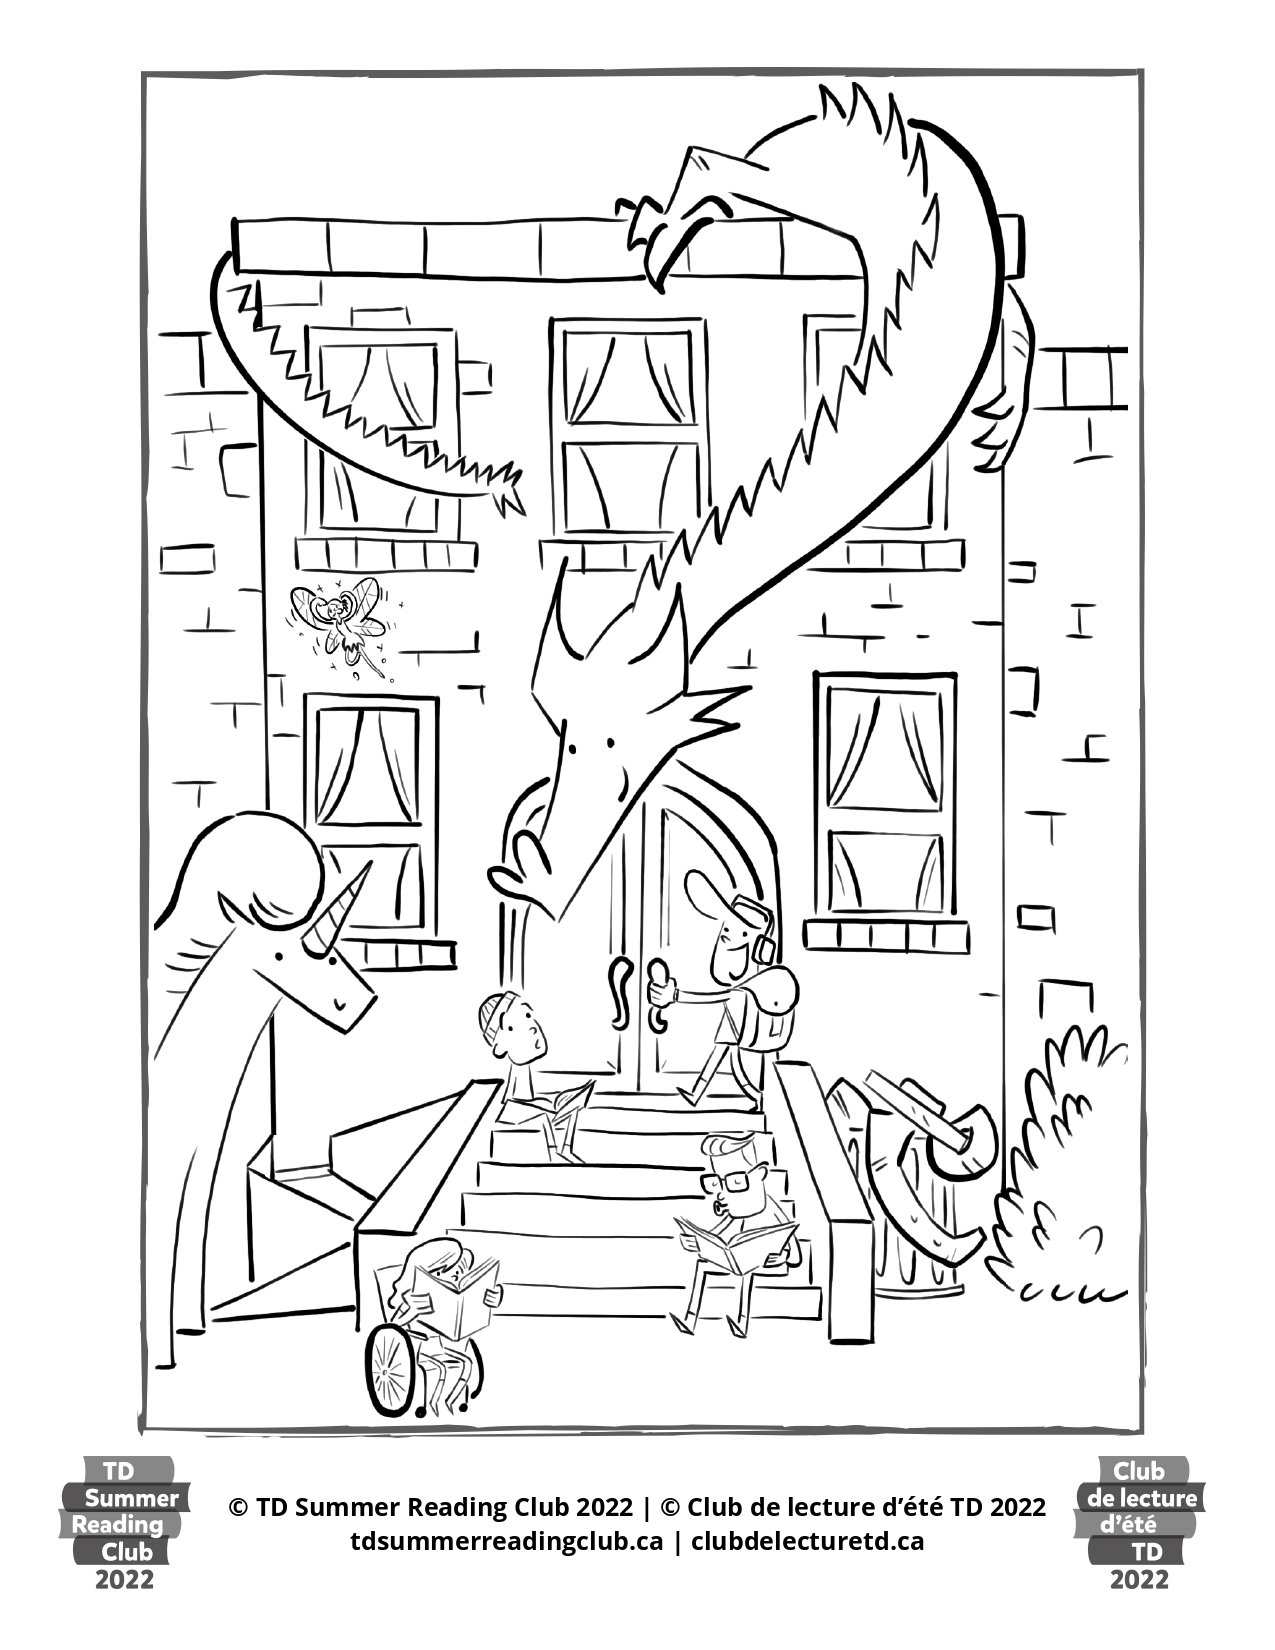 Colouring contest page dragon on building